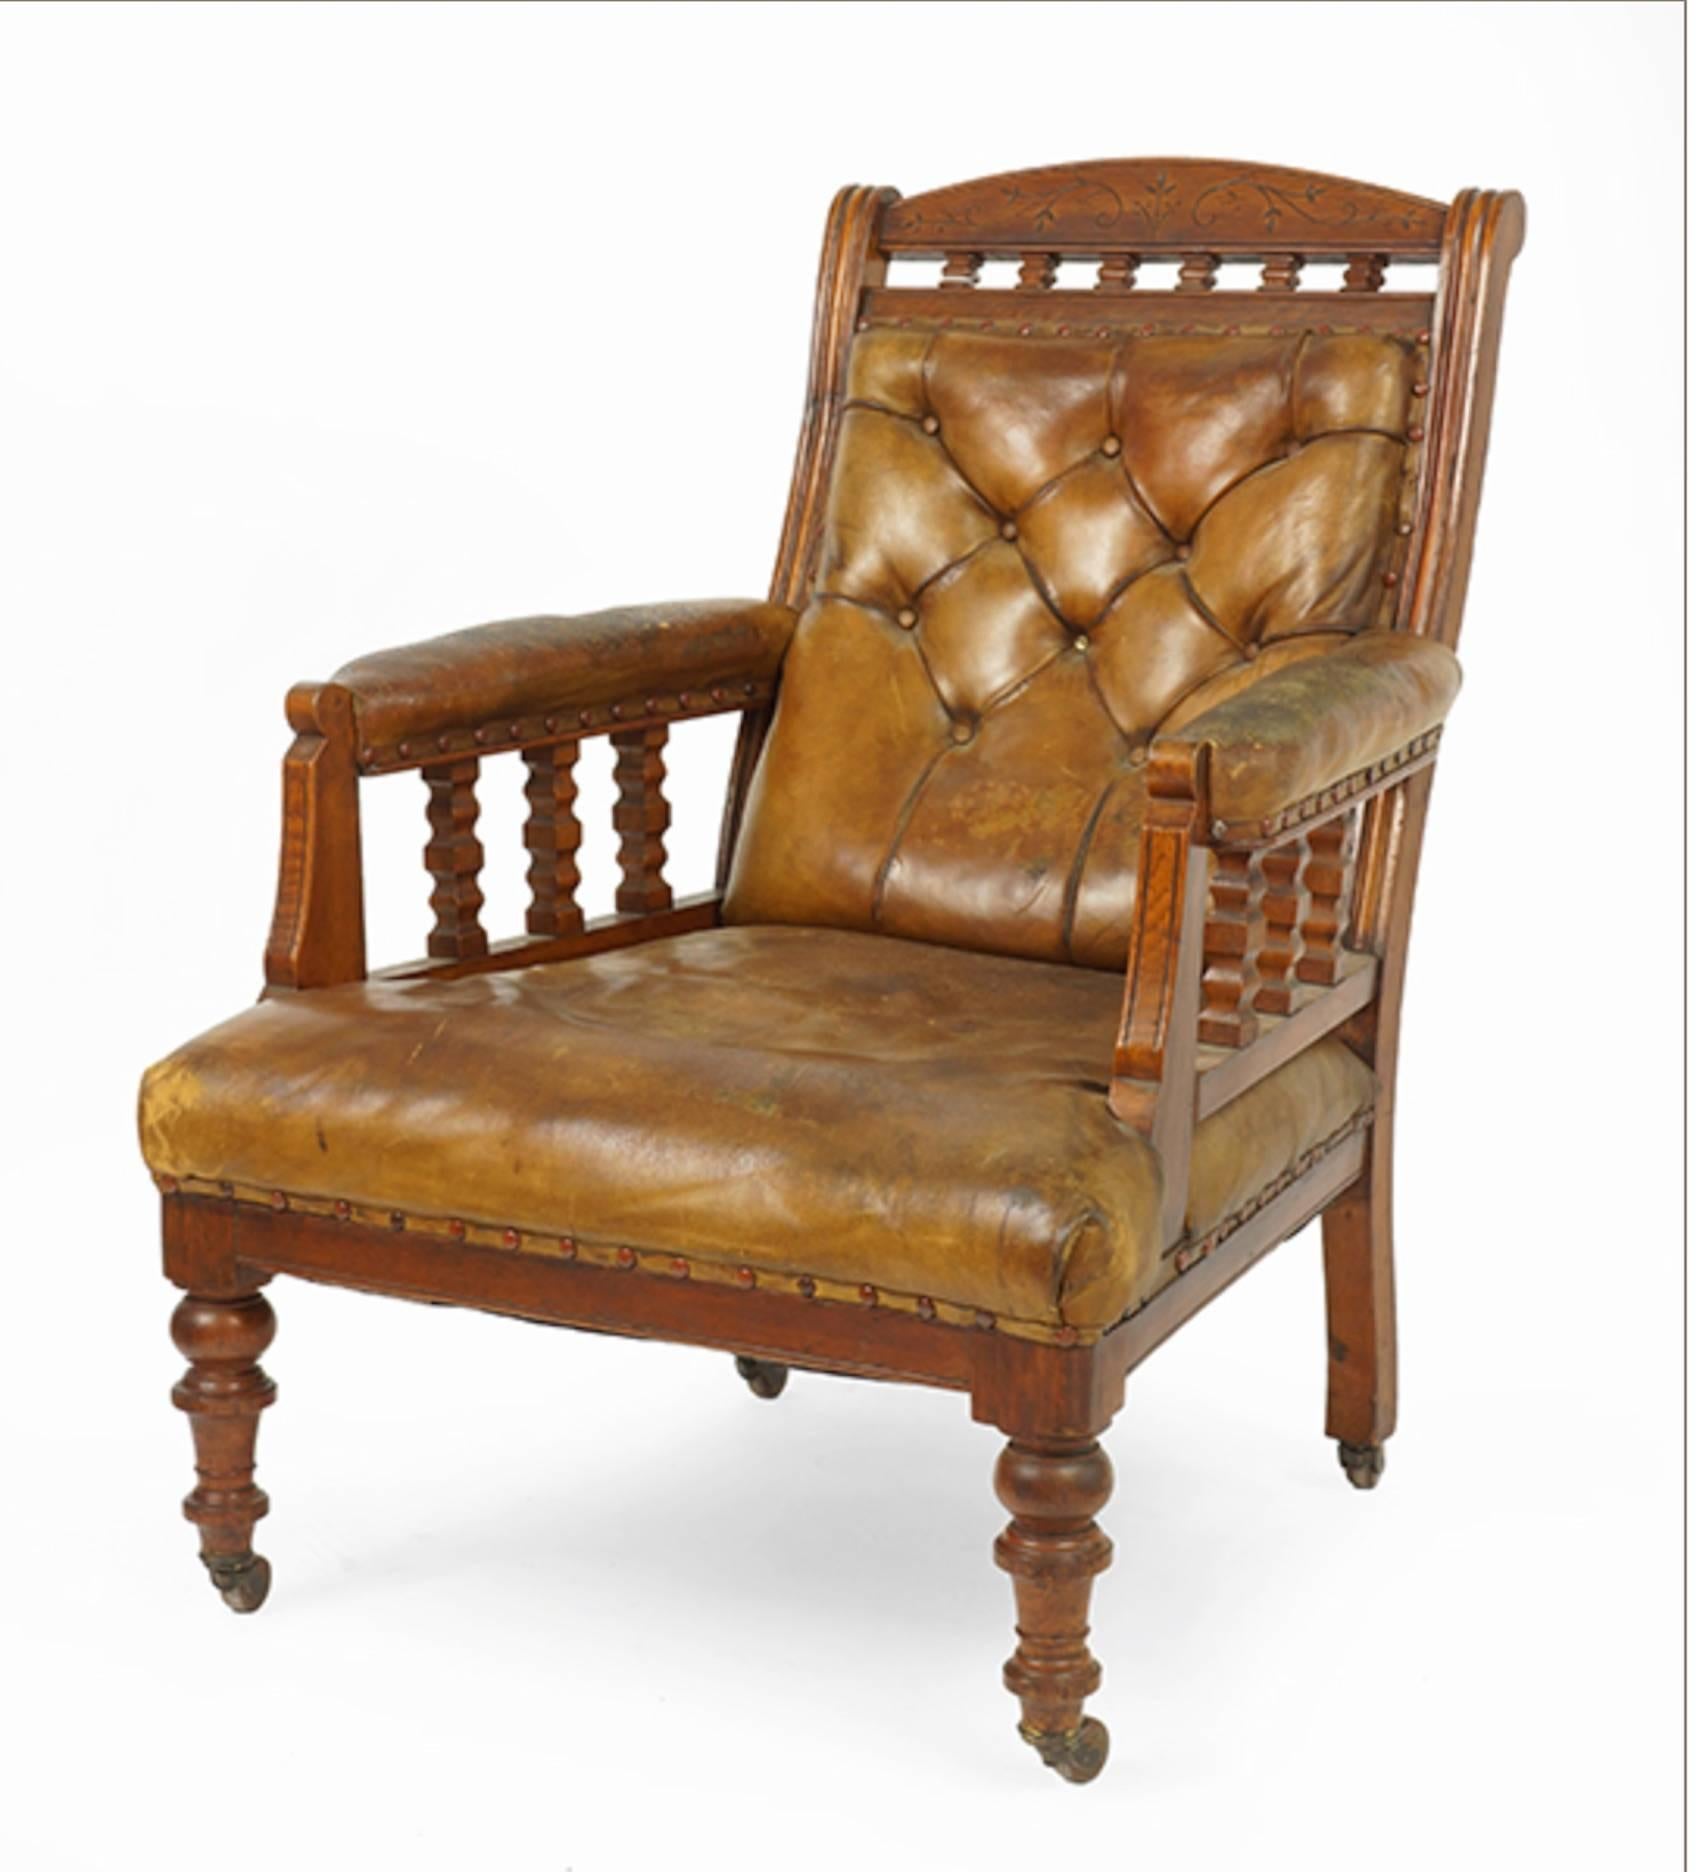 19th century English oak and leather library chair. Lovely old patina.